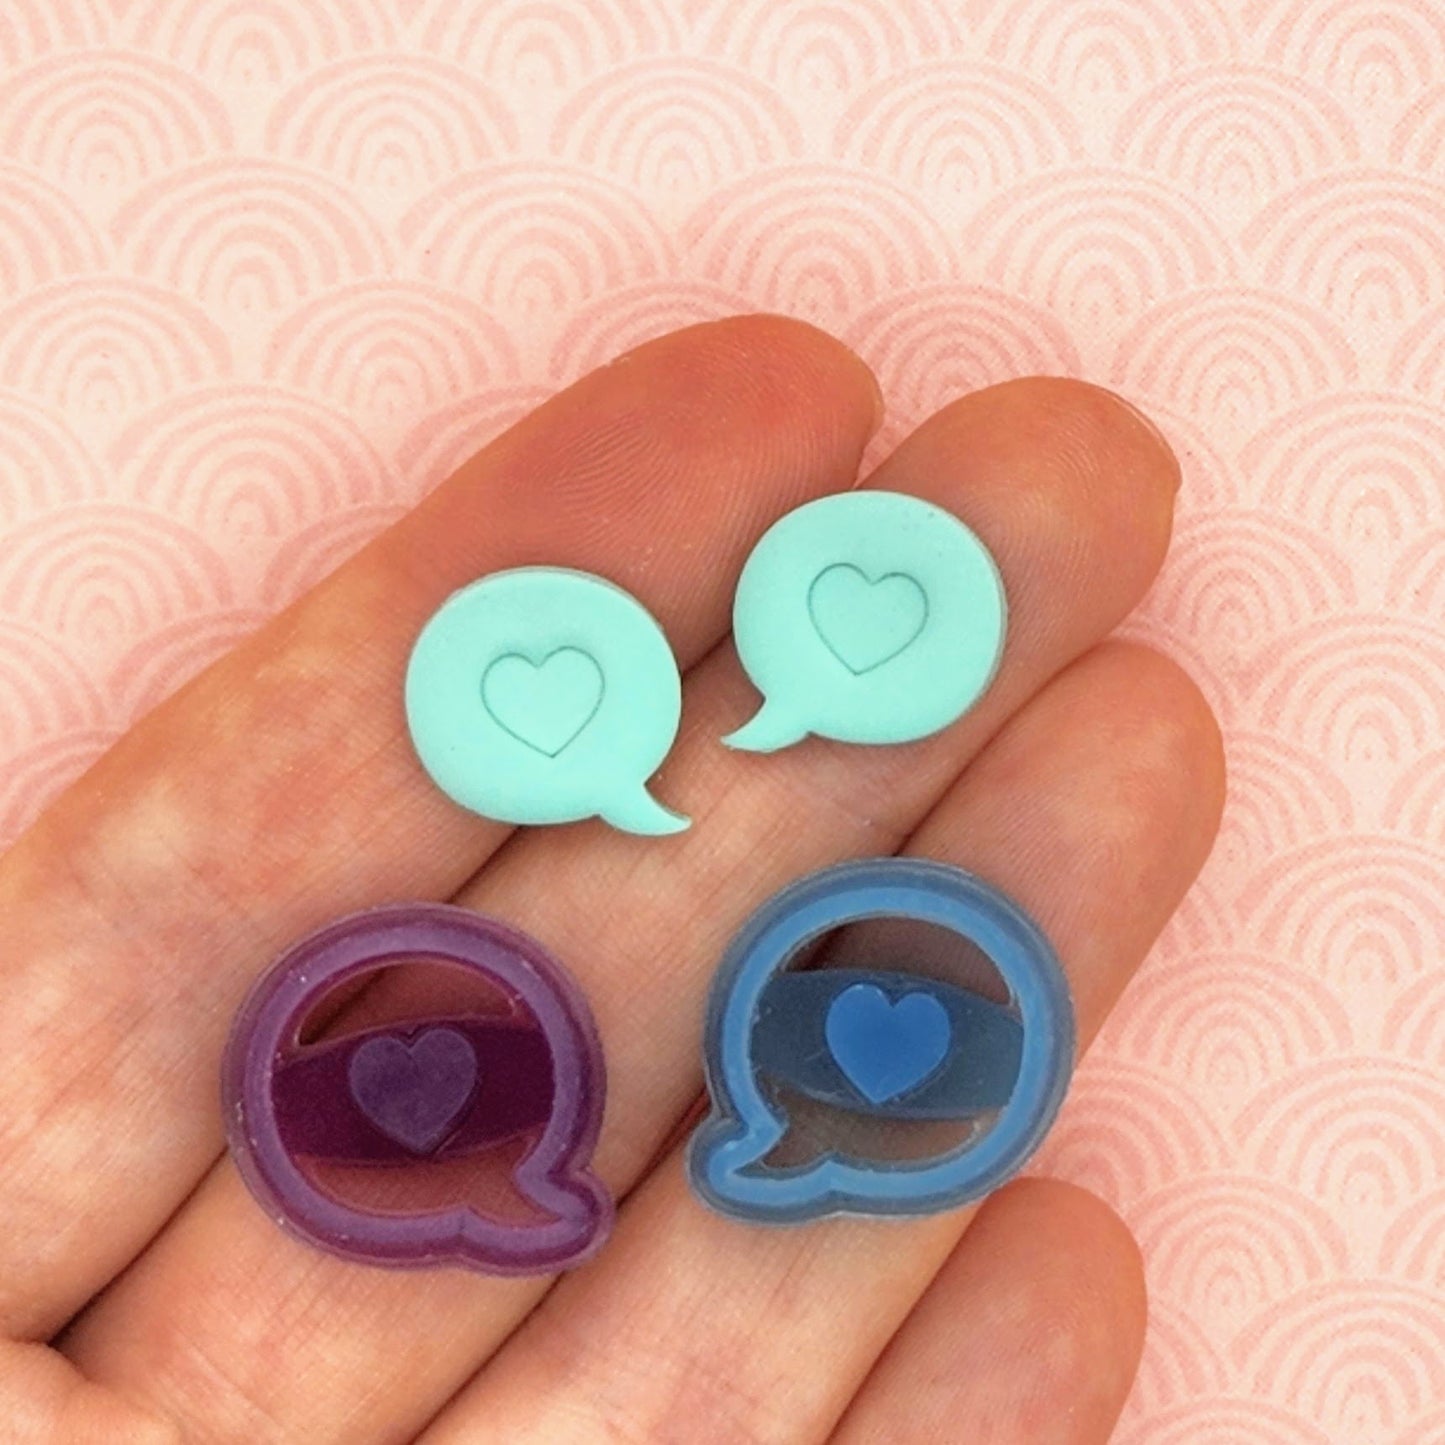 Heart Speech Bubble Polymer Clay Stud Cutters - Mirrored Pair